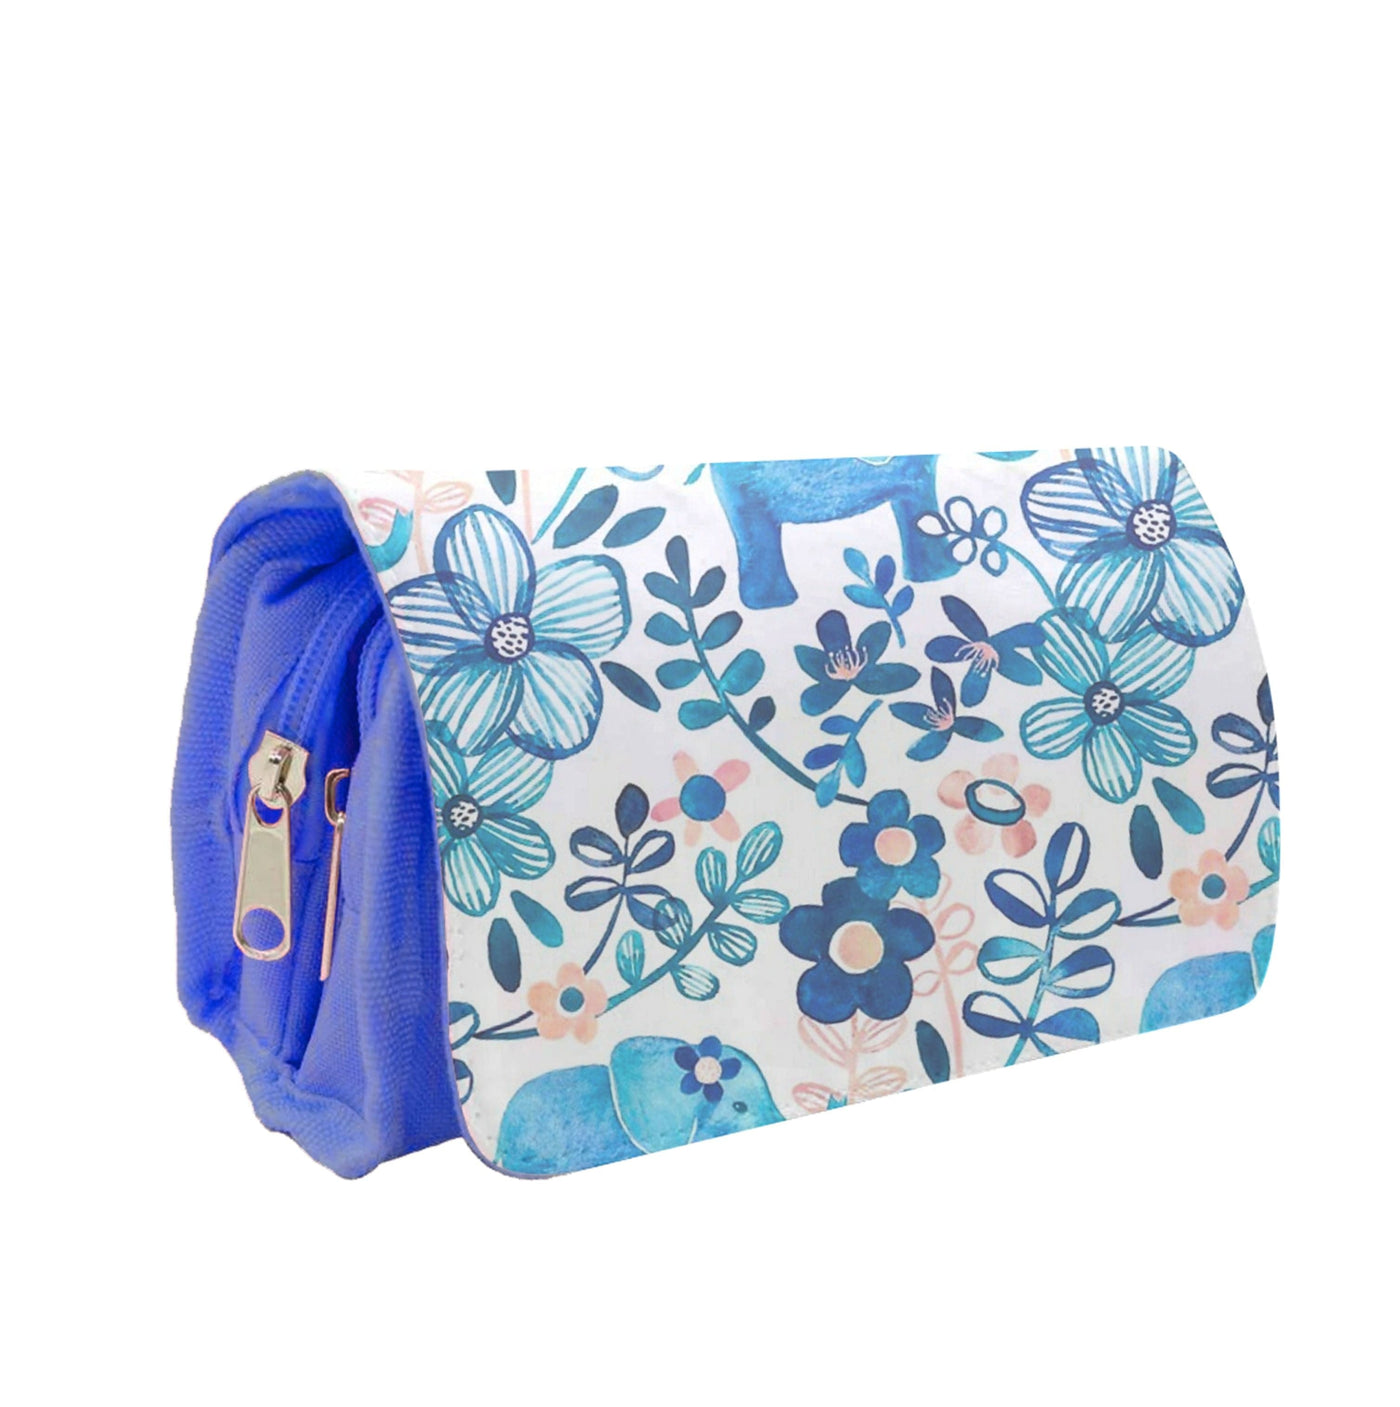 Elephant and Floral Pattern Pencil Case